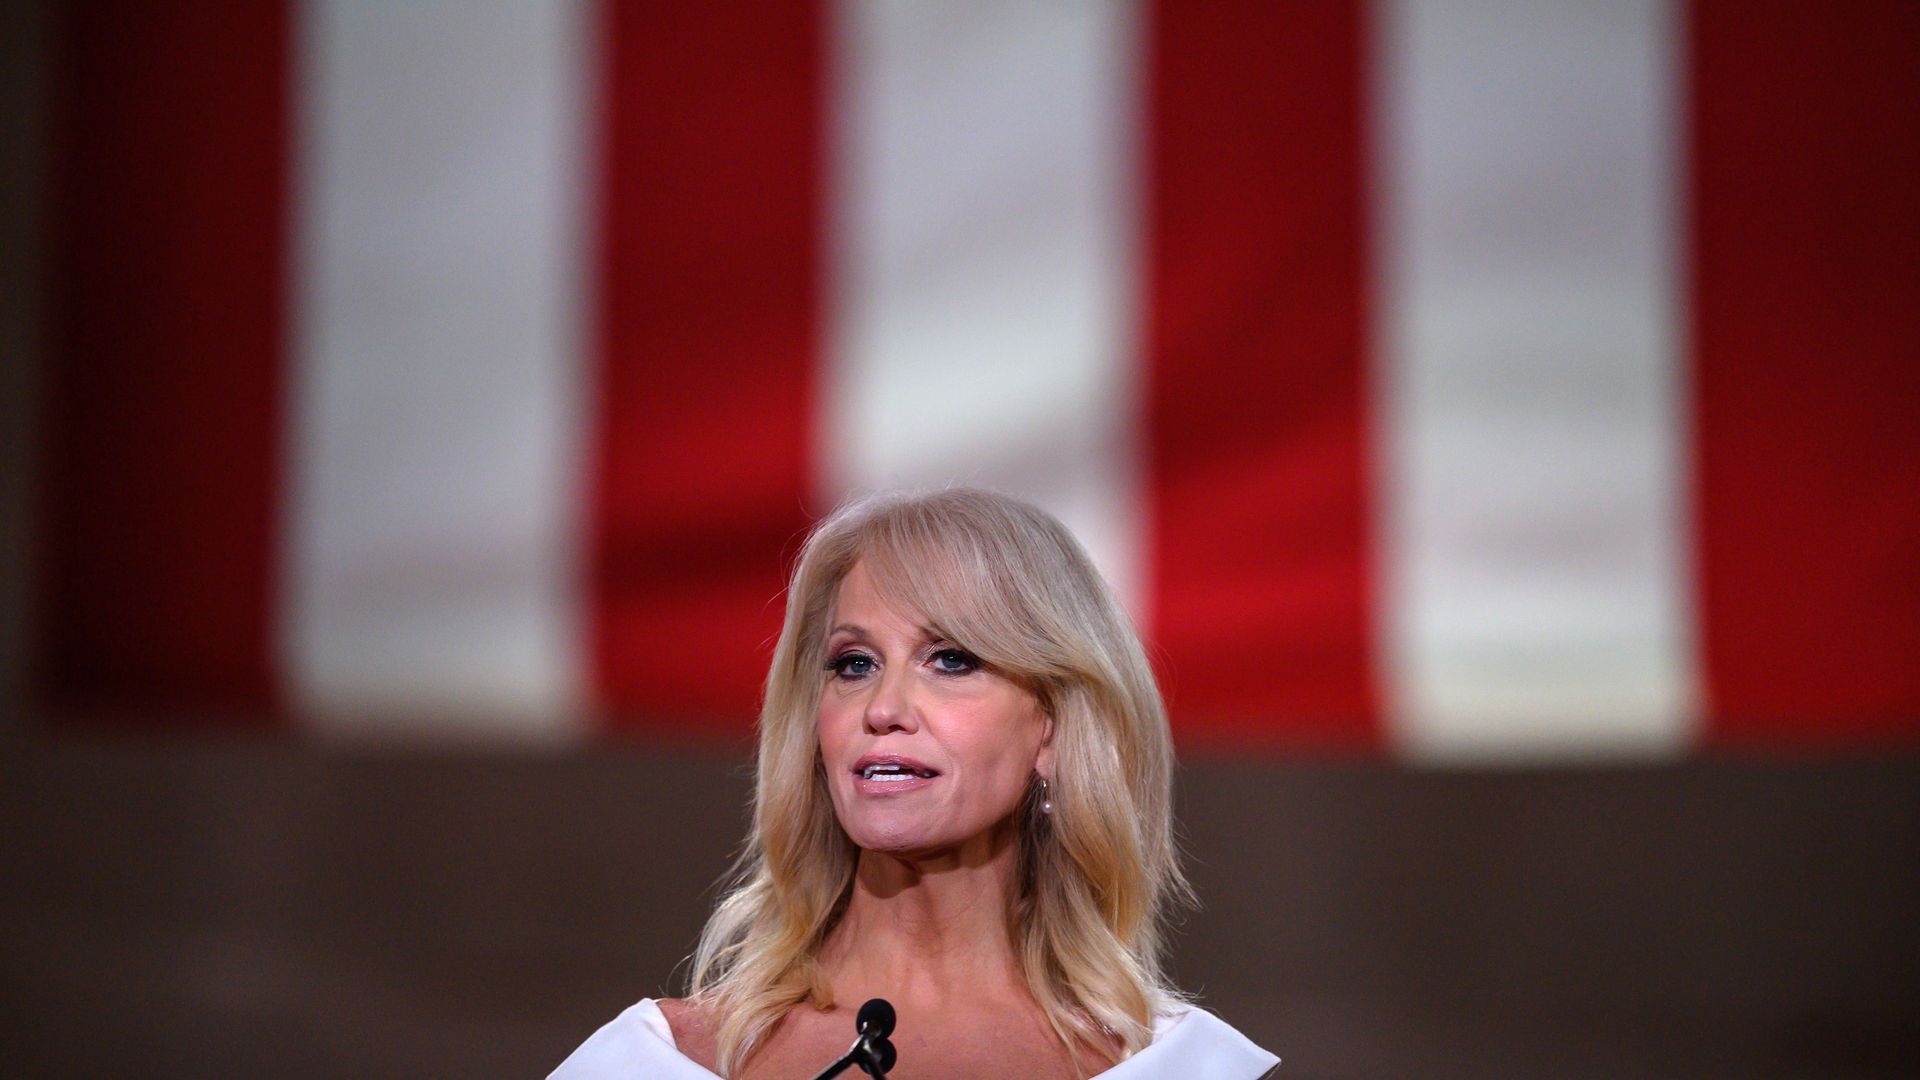 Kellyanne Conway is seen speaking at the 2020 Republican National Convention.